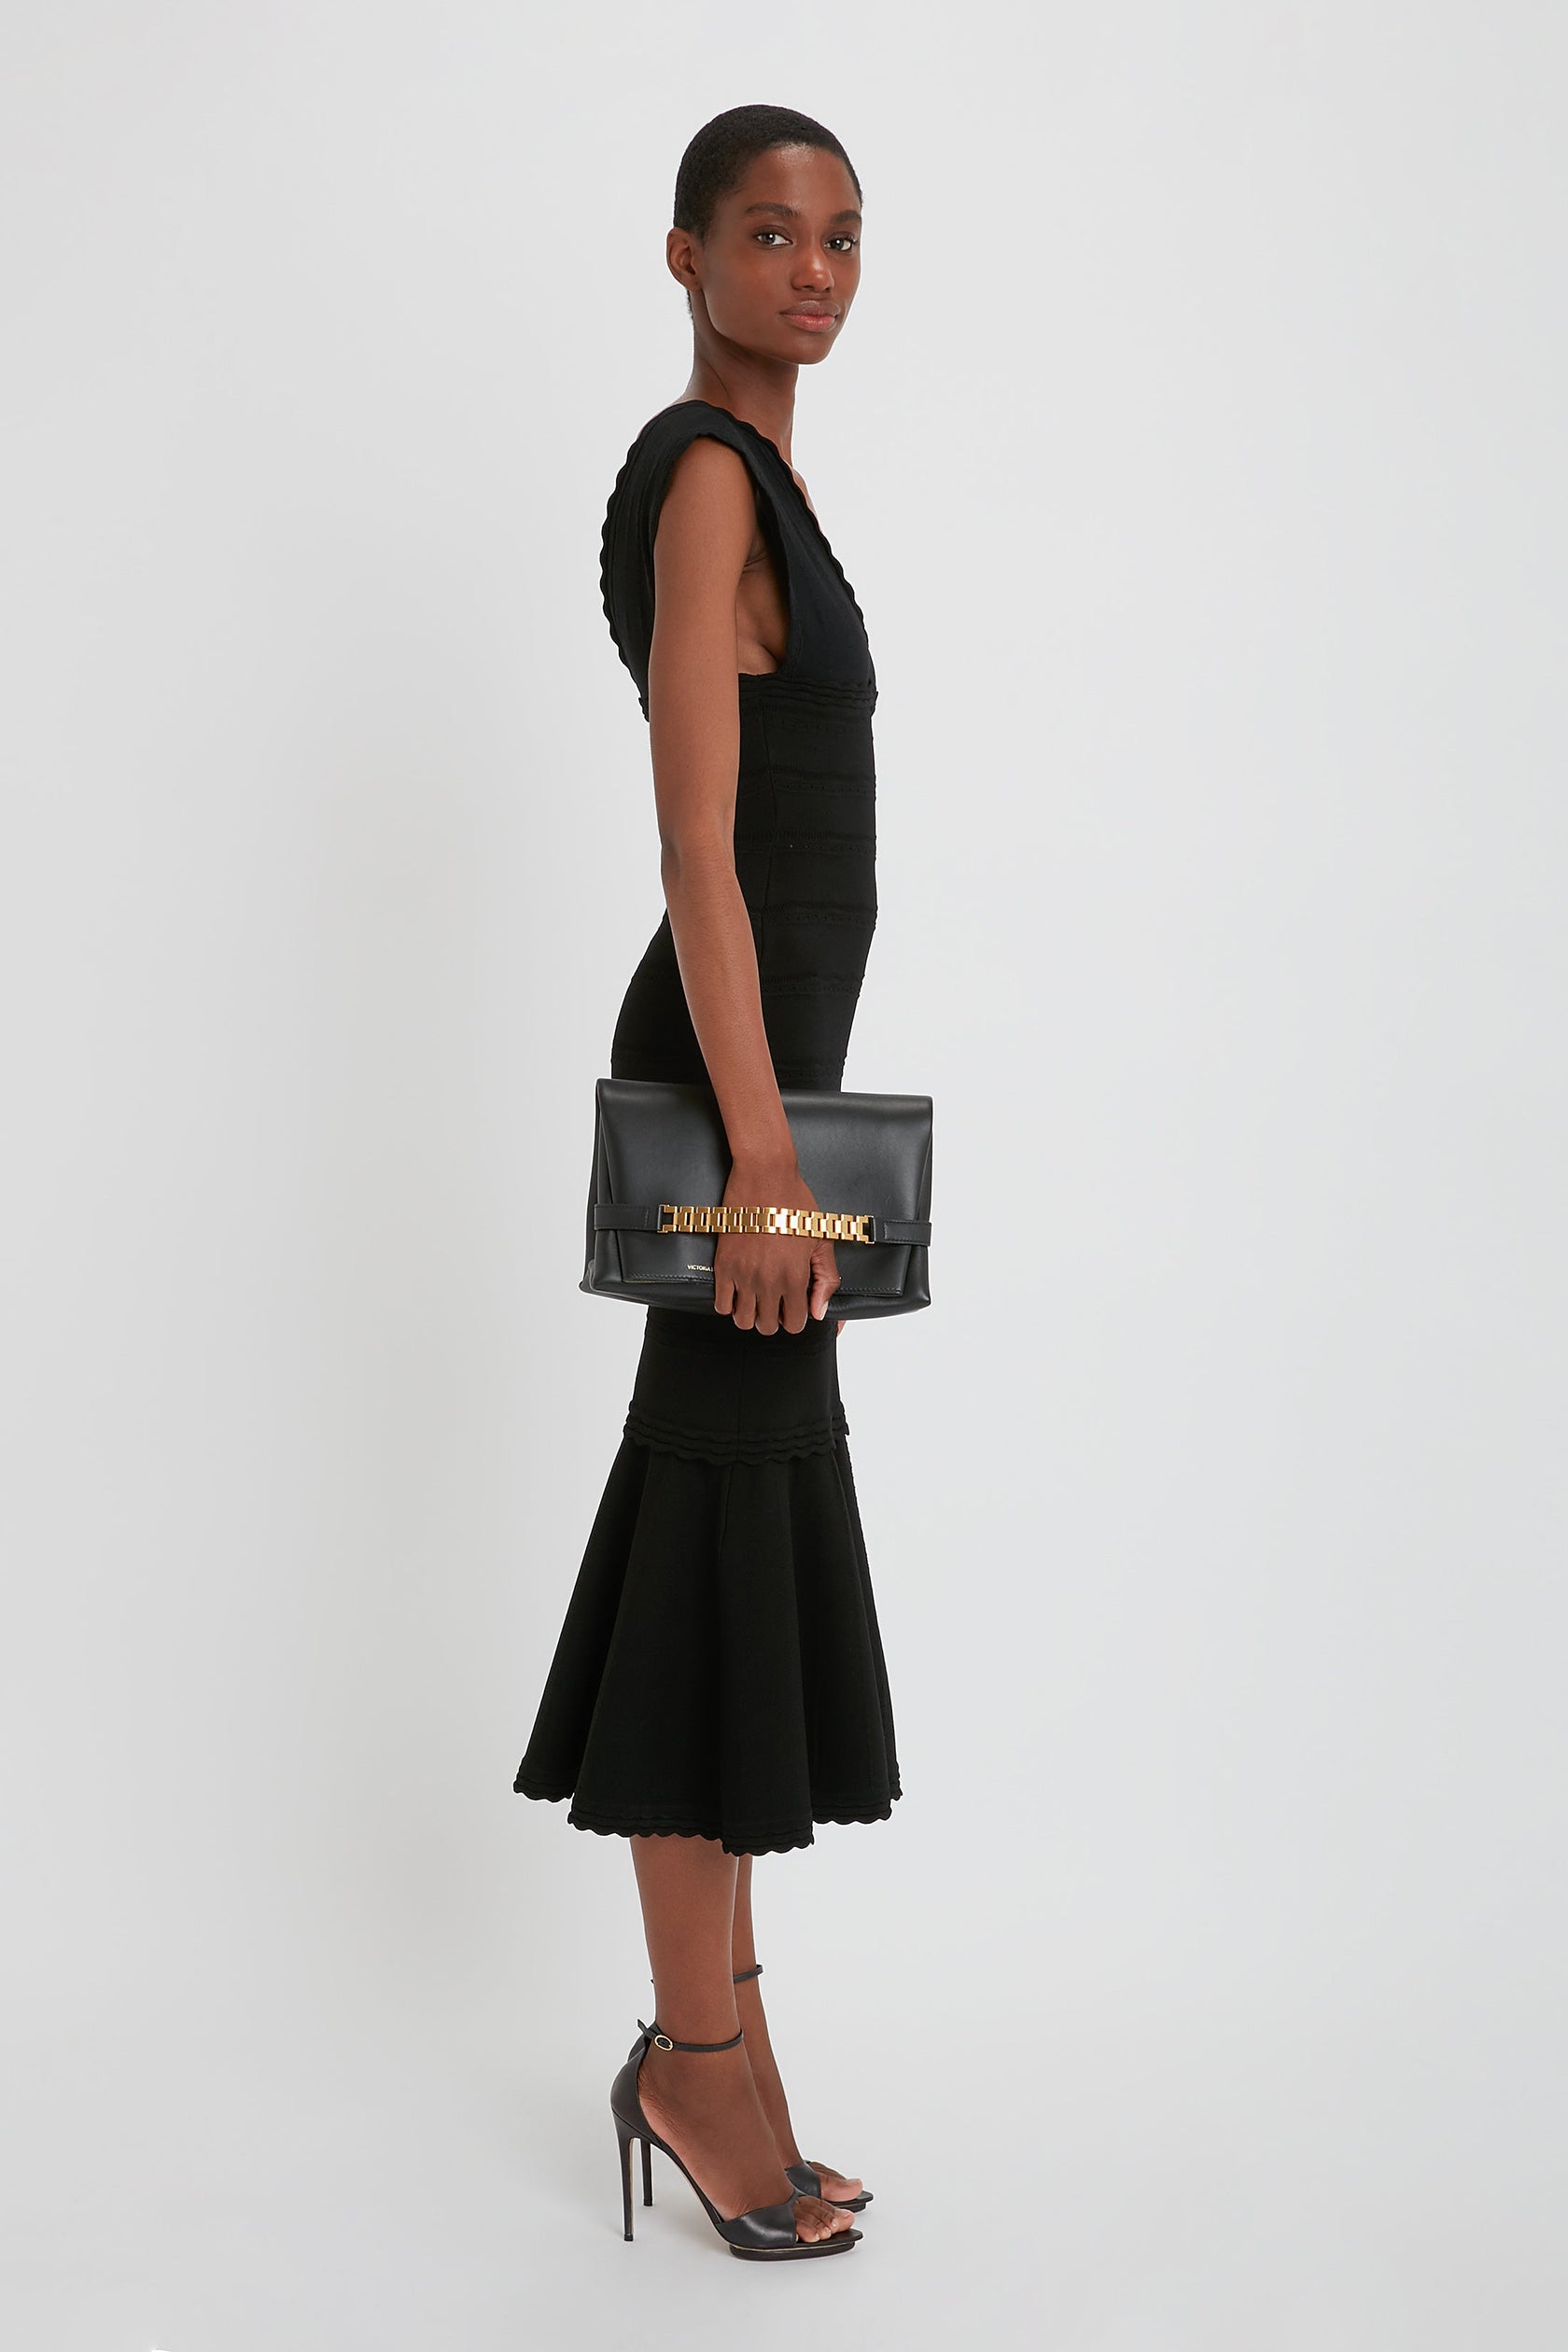 Chain Pouch with Strap In Black Leather – Victoria Beckham US